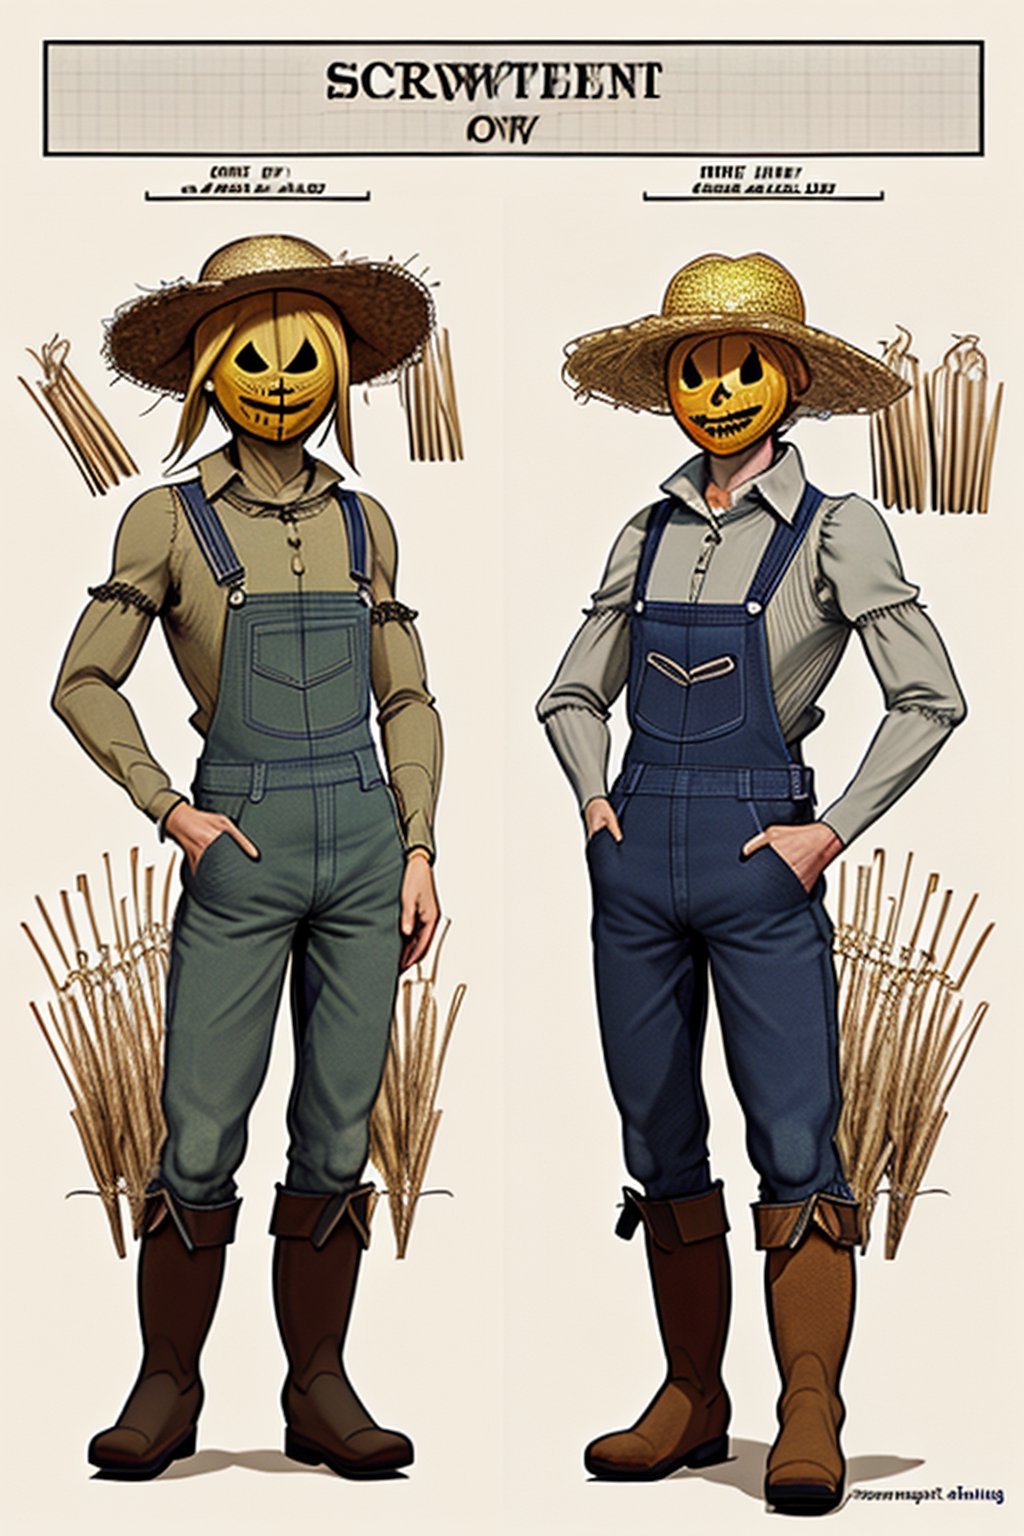 draft, outline, monochrome,  reference sheet, how to build a scarecrow with old overalls with holes, old clothing, tractor and cornfield. ((((Straw coming out of scarecrow boots and sleeves)))), checkered shirt, smoking a pipe, straw hat, whiskey bottle in pocket, vintage sewing machine, Carhartt